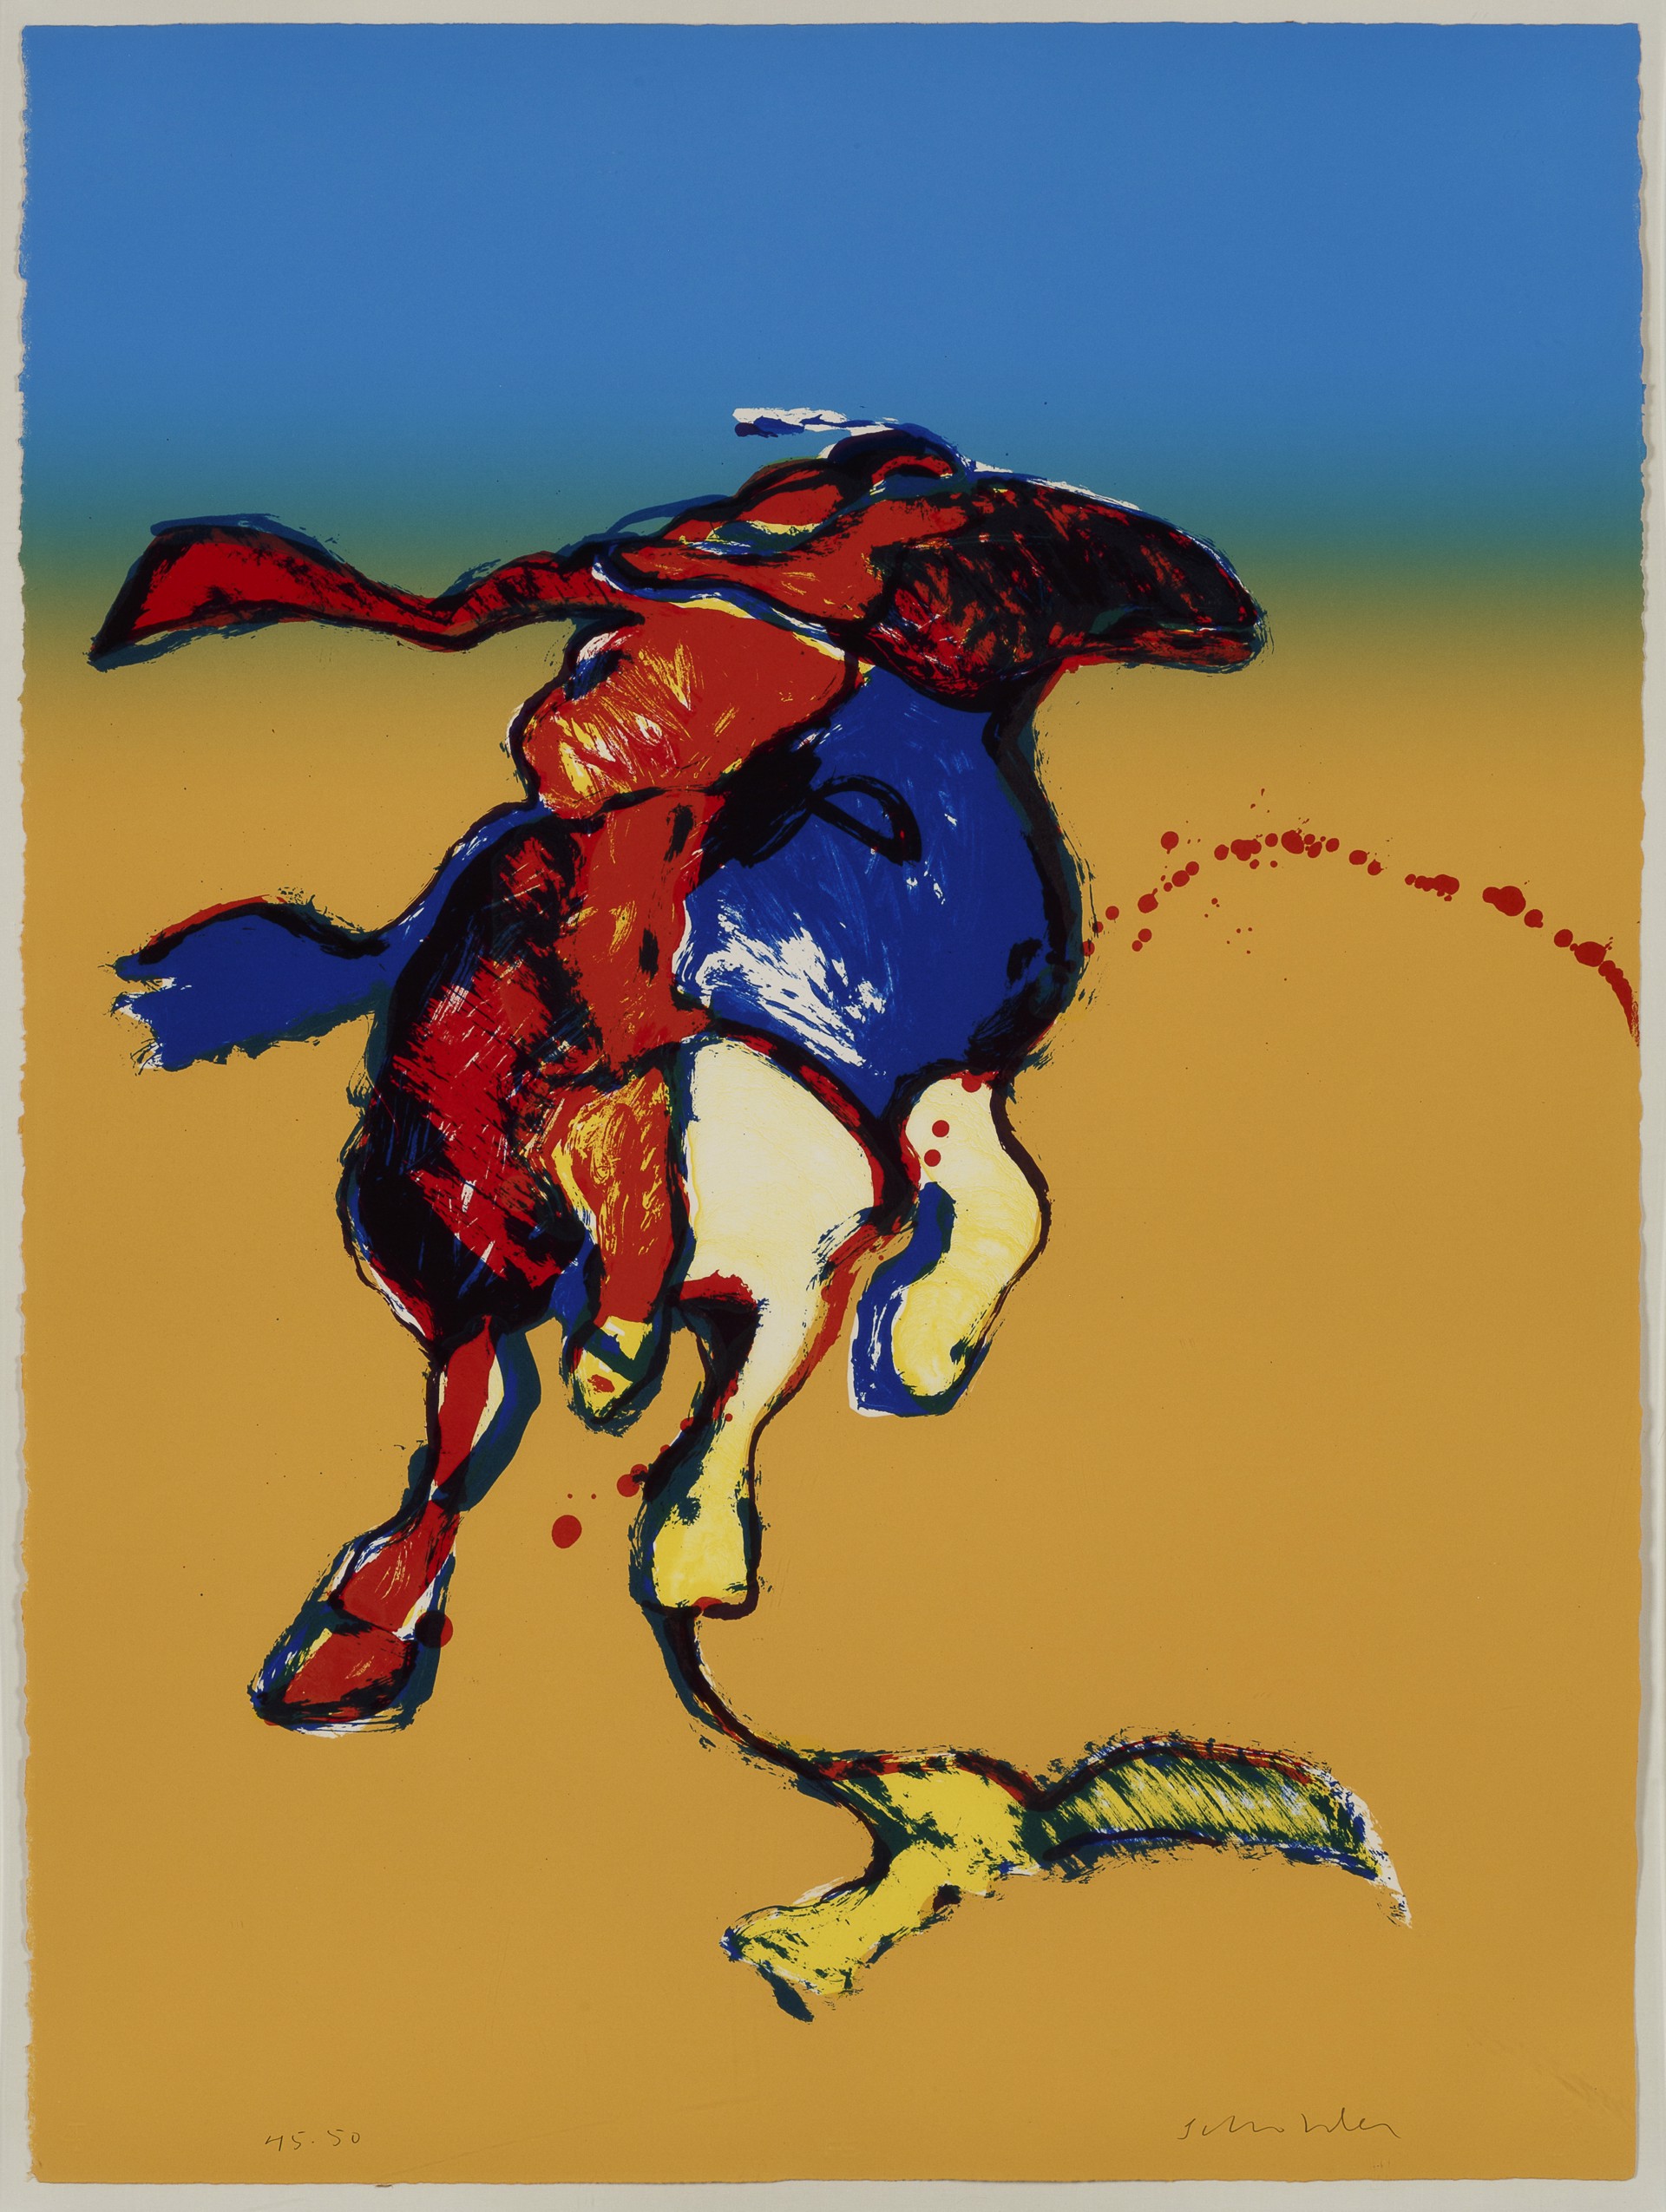 Indian on Galloping Horse After Remington #2 (First State) by Fritz Scholder